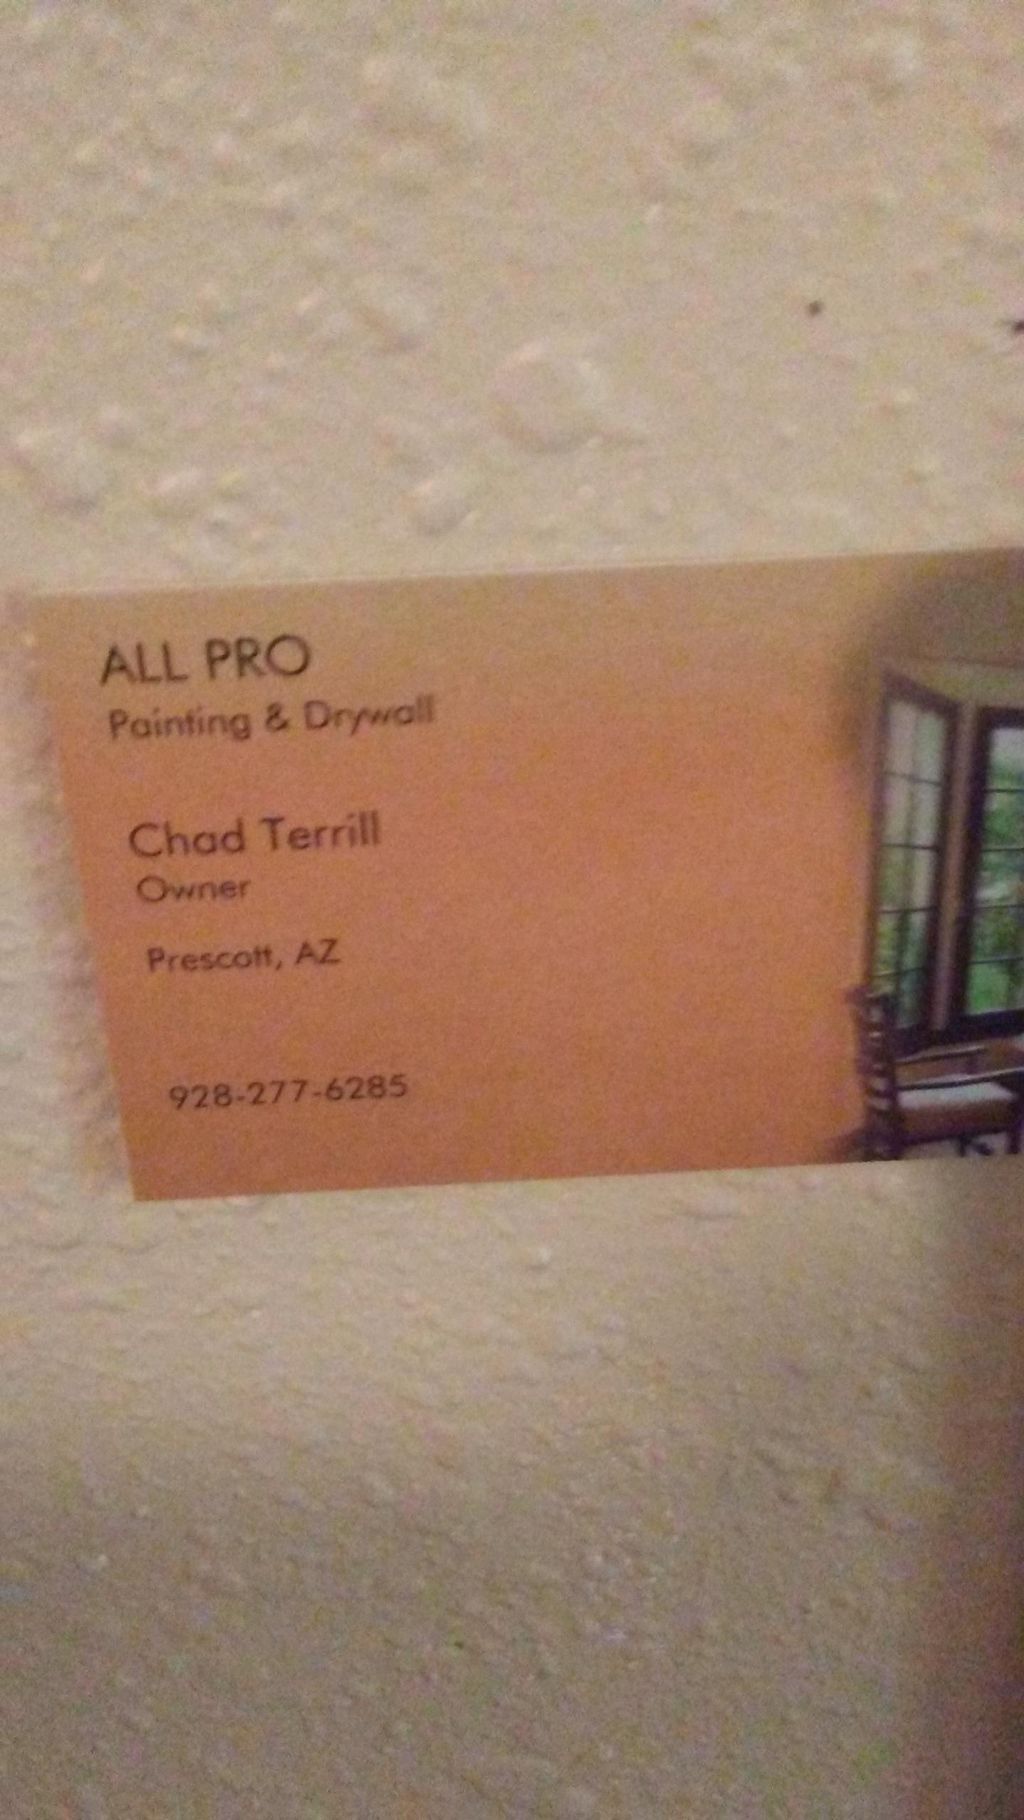 AllPro Painting&drywall